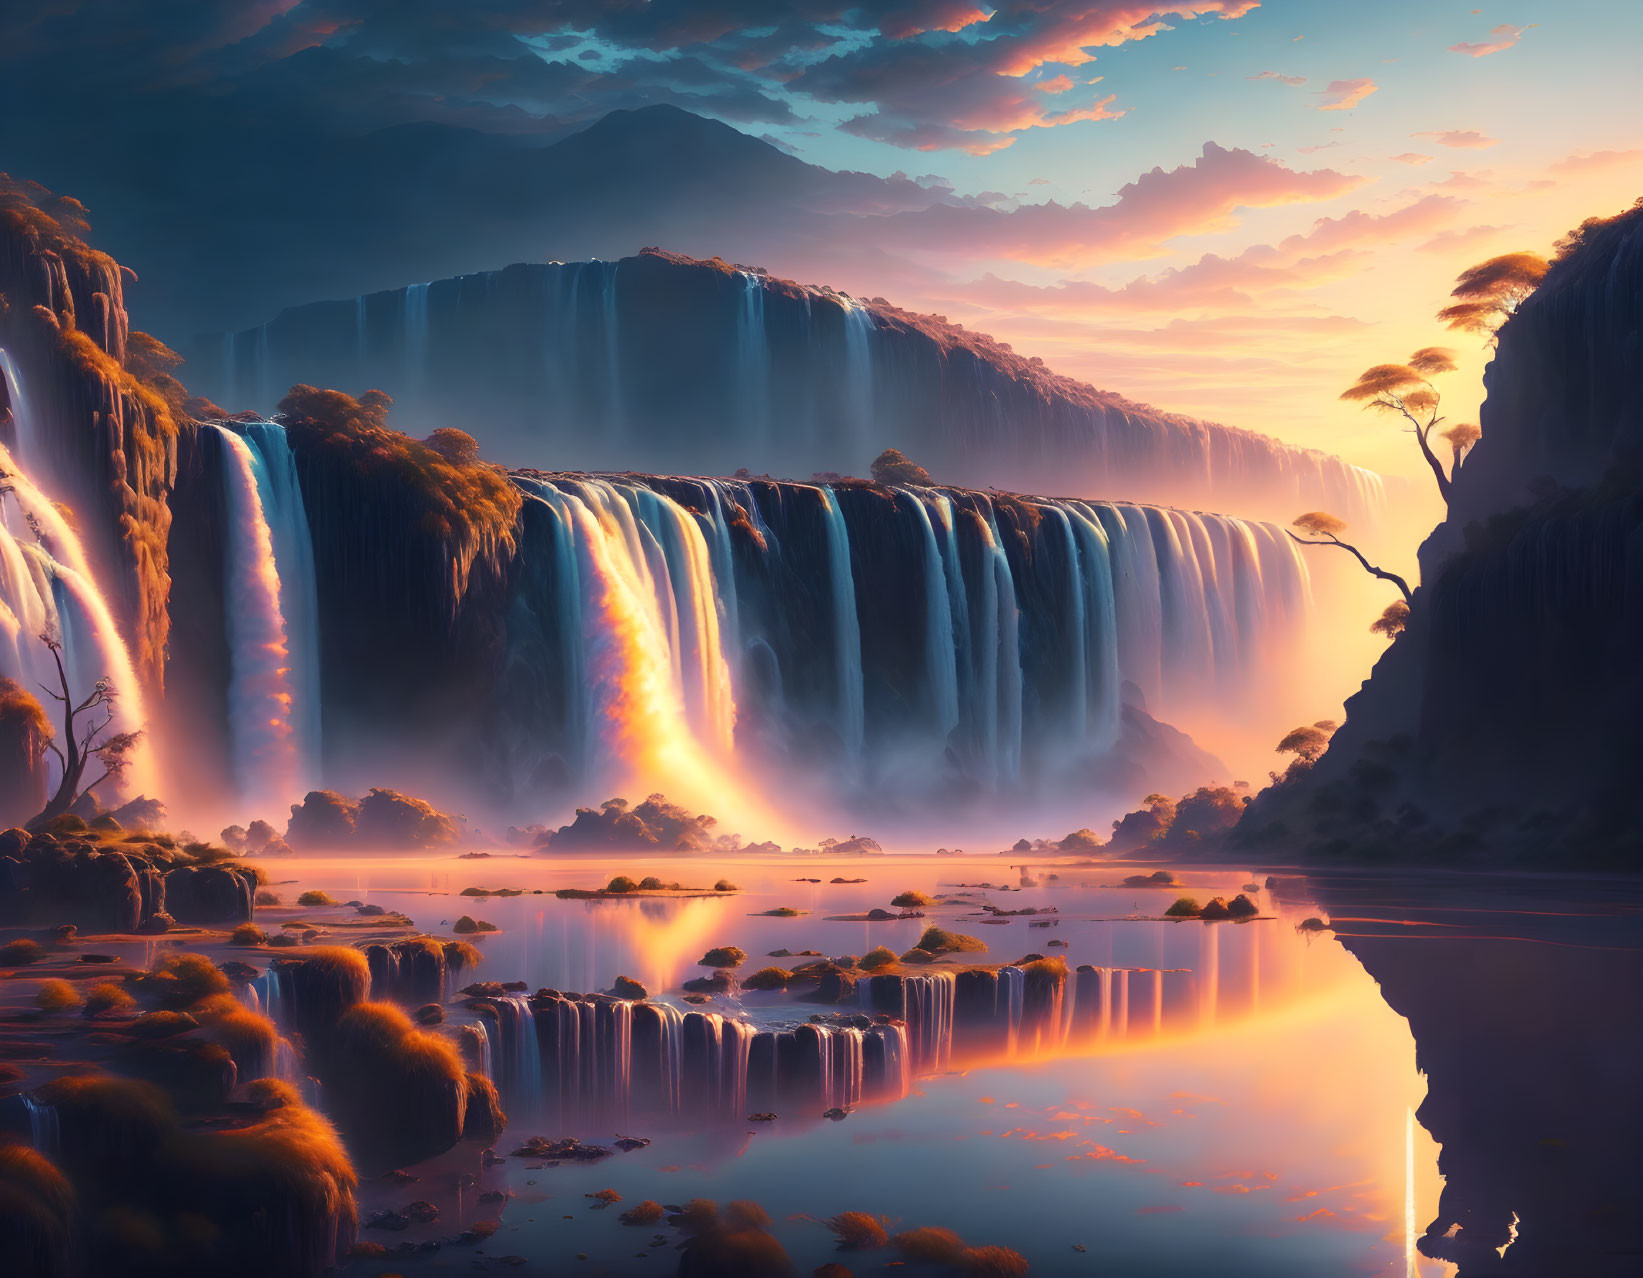 Sunset waterfall cascading over cliff into tranquil river